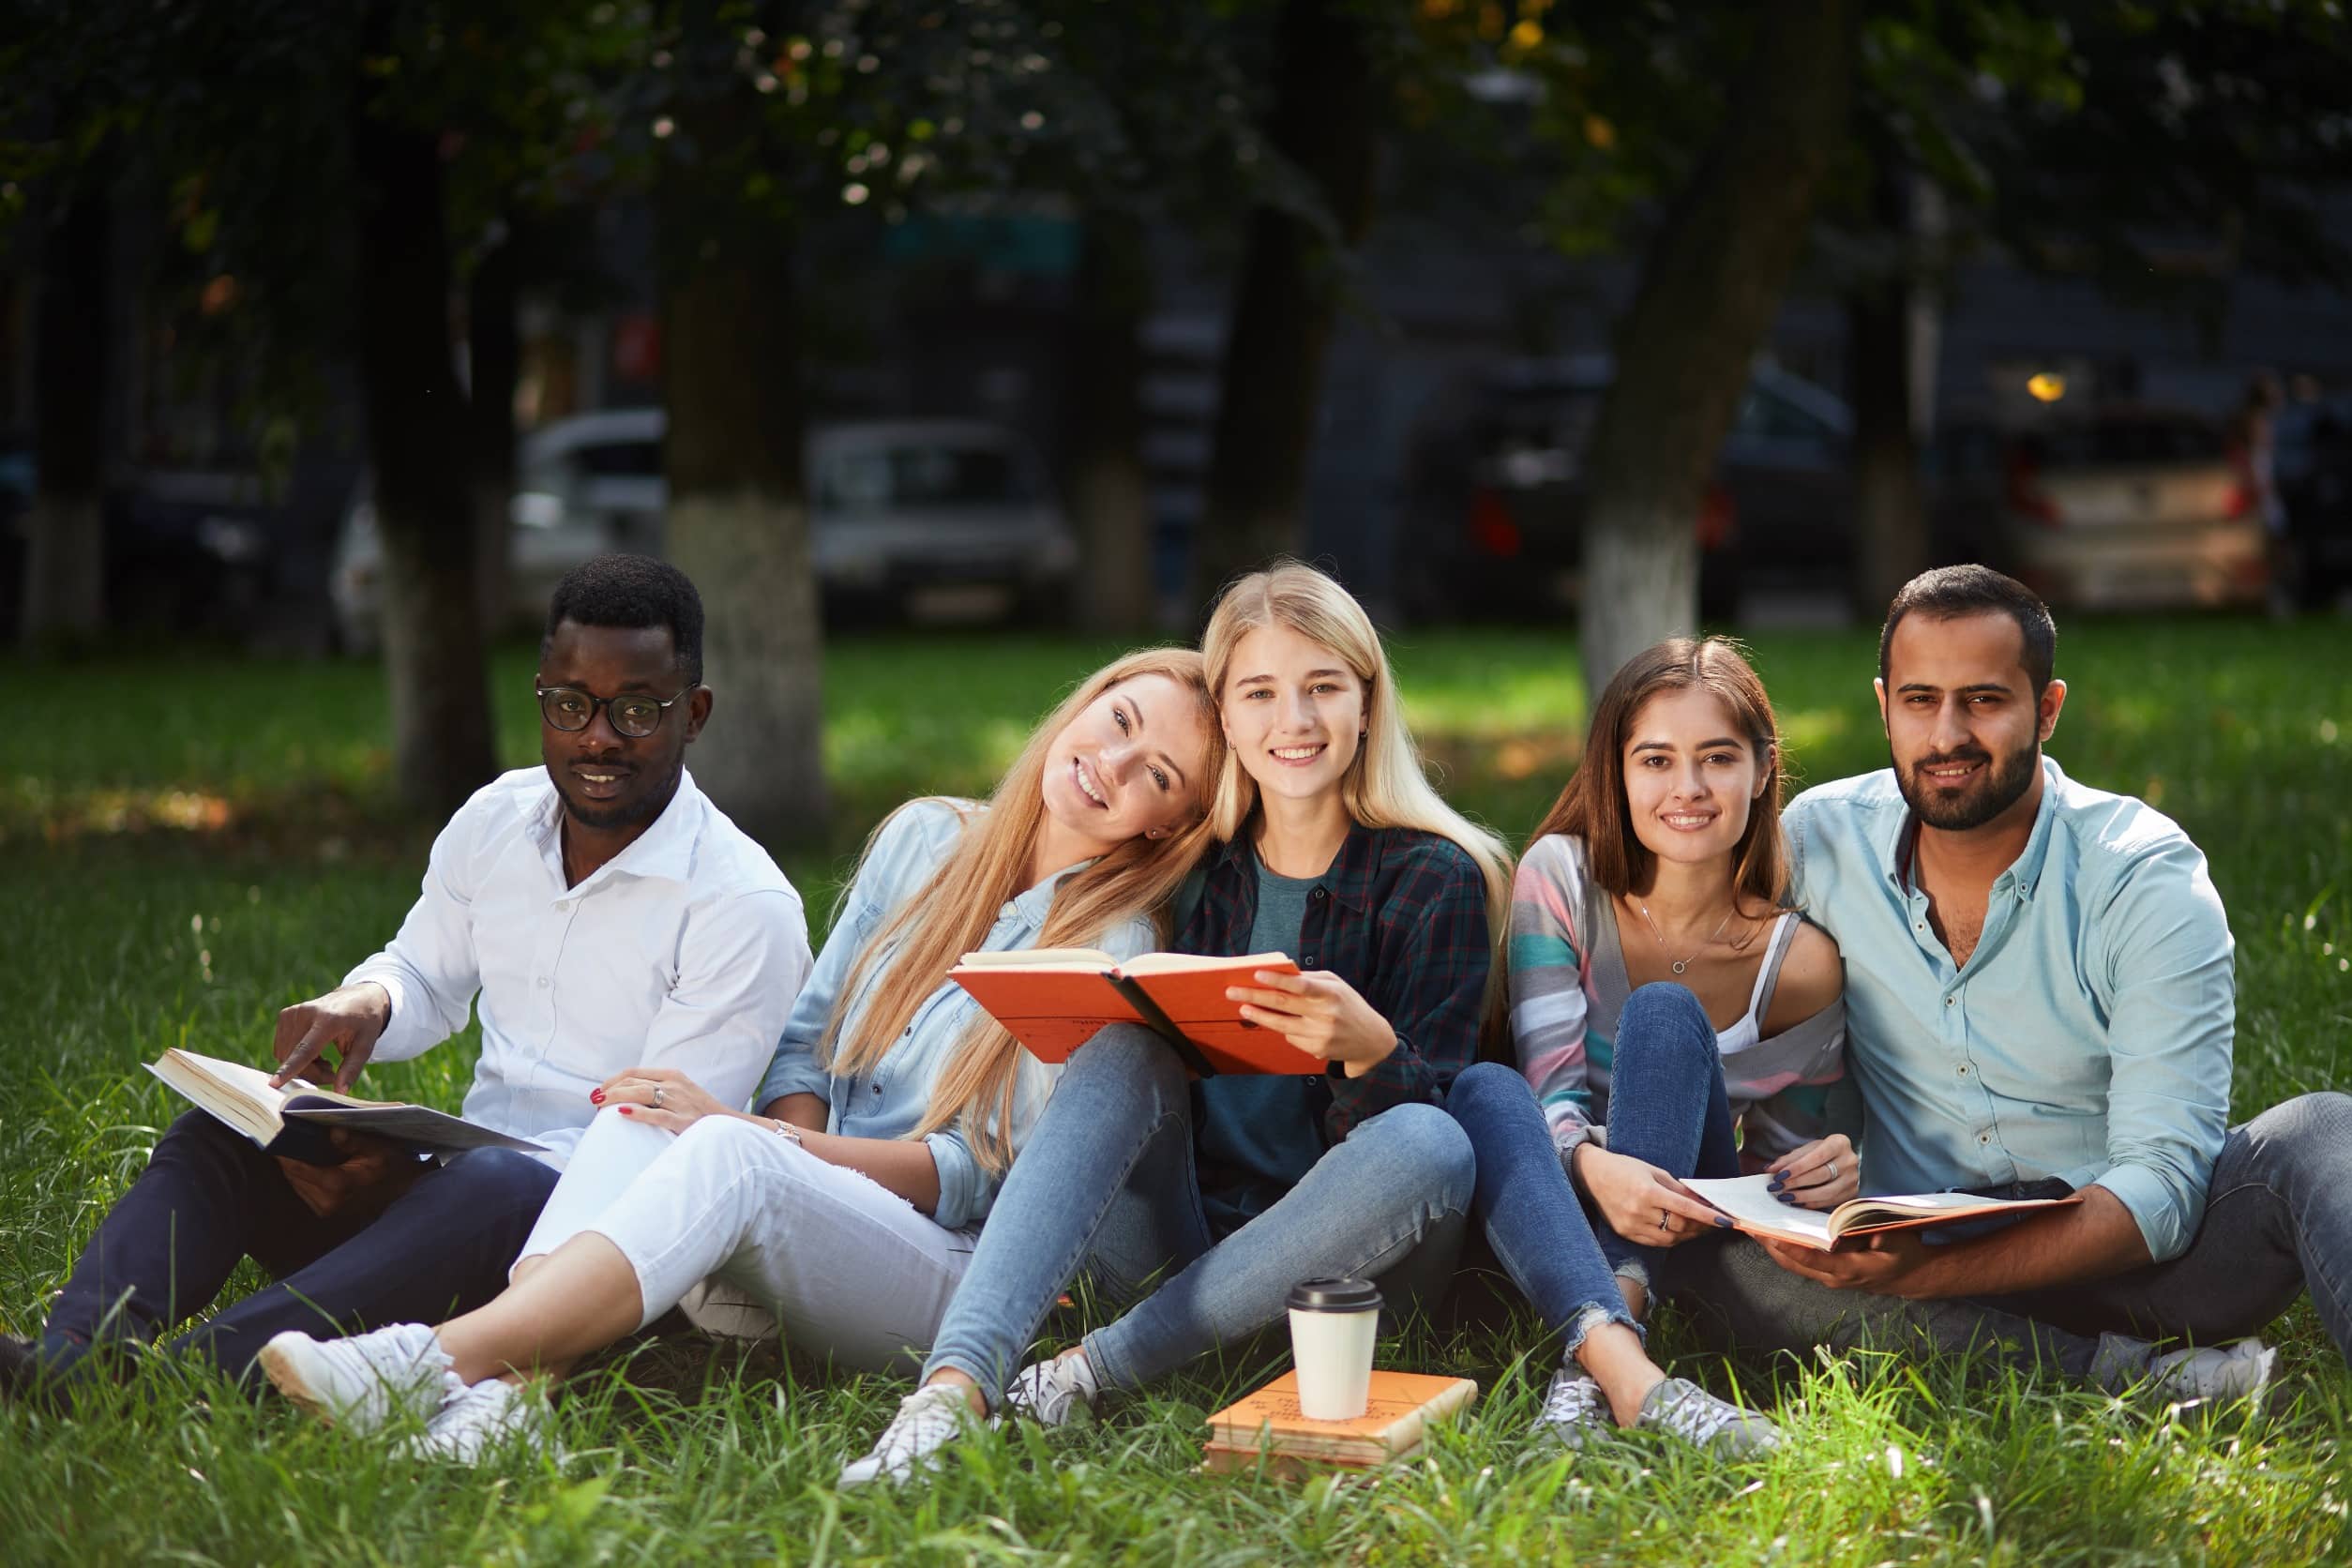 A diverse group of students studying and relaxing in a park, some holding their Canada student visa documents.